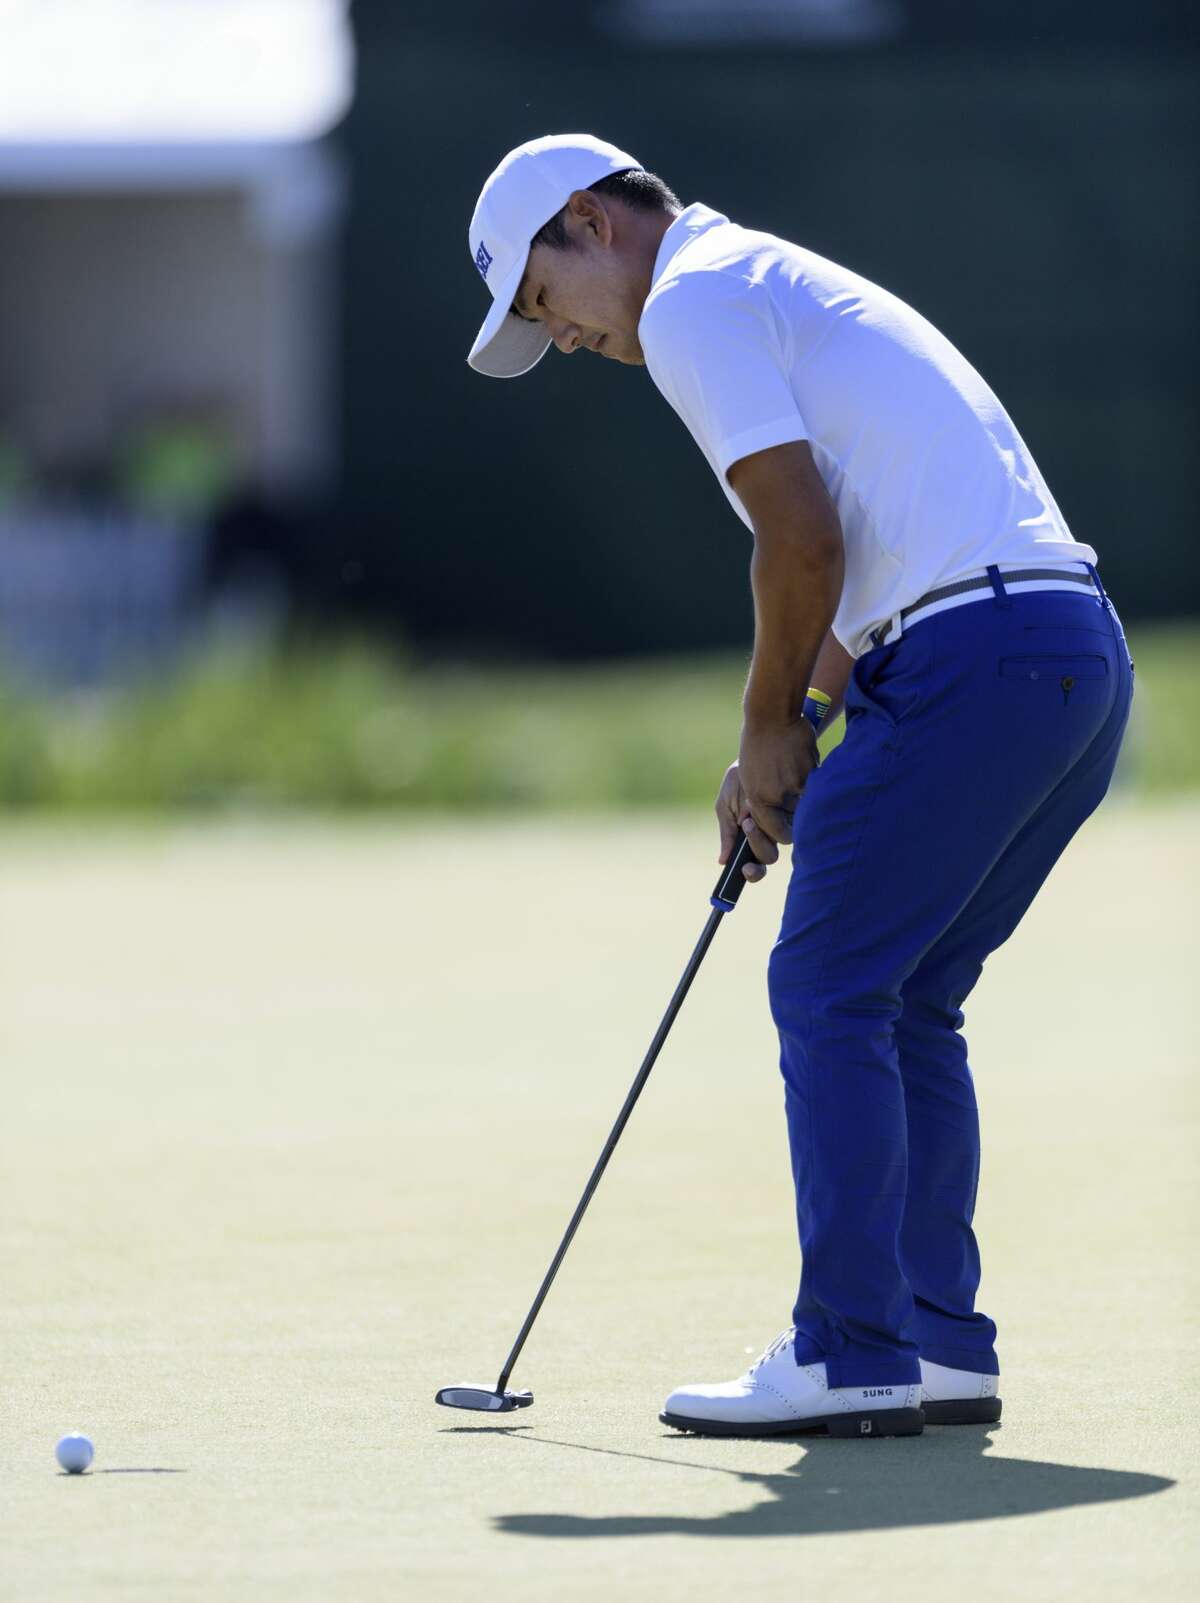 Sung Kang misses a short putt on the 18th green during the the first round of the Houston Open golf tournament Thursday, March 30, 2017, in Humble Texas. The bogey dropped Kang one shot behind Rickie Fowler after the first round. (Wilf Thorne/Houston Chronicle via AP)